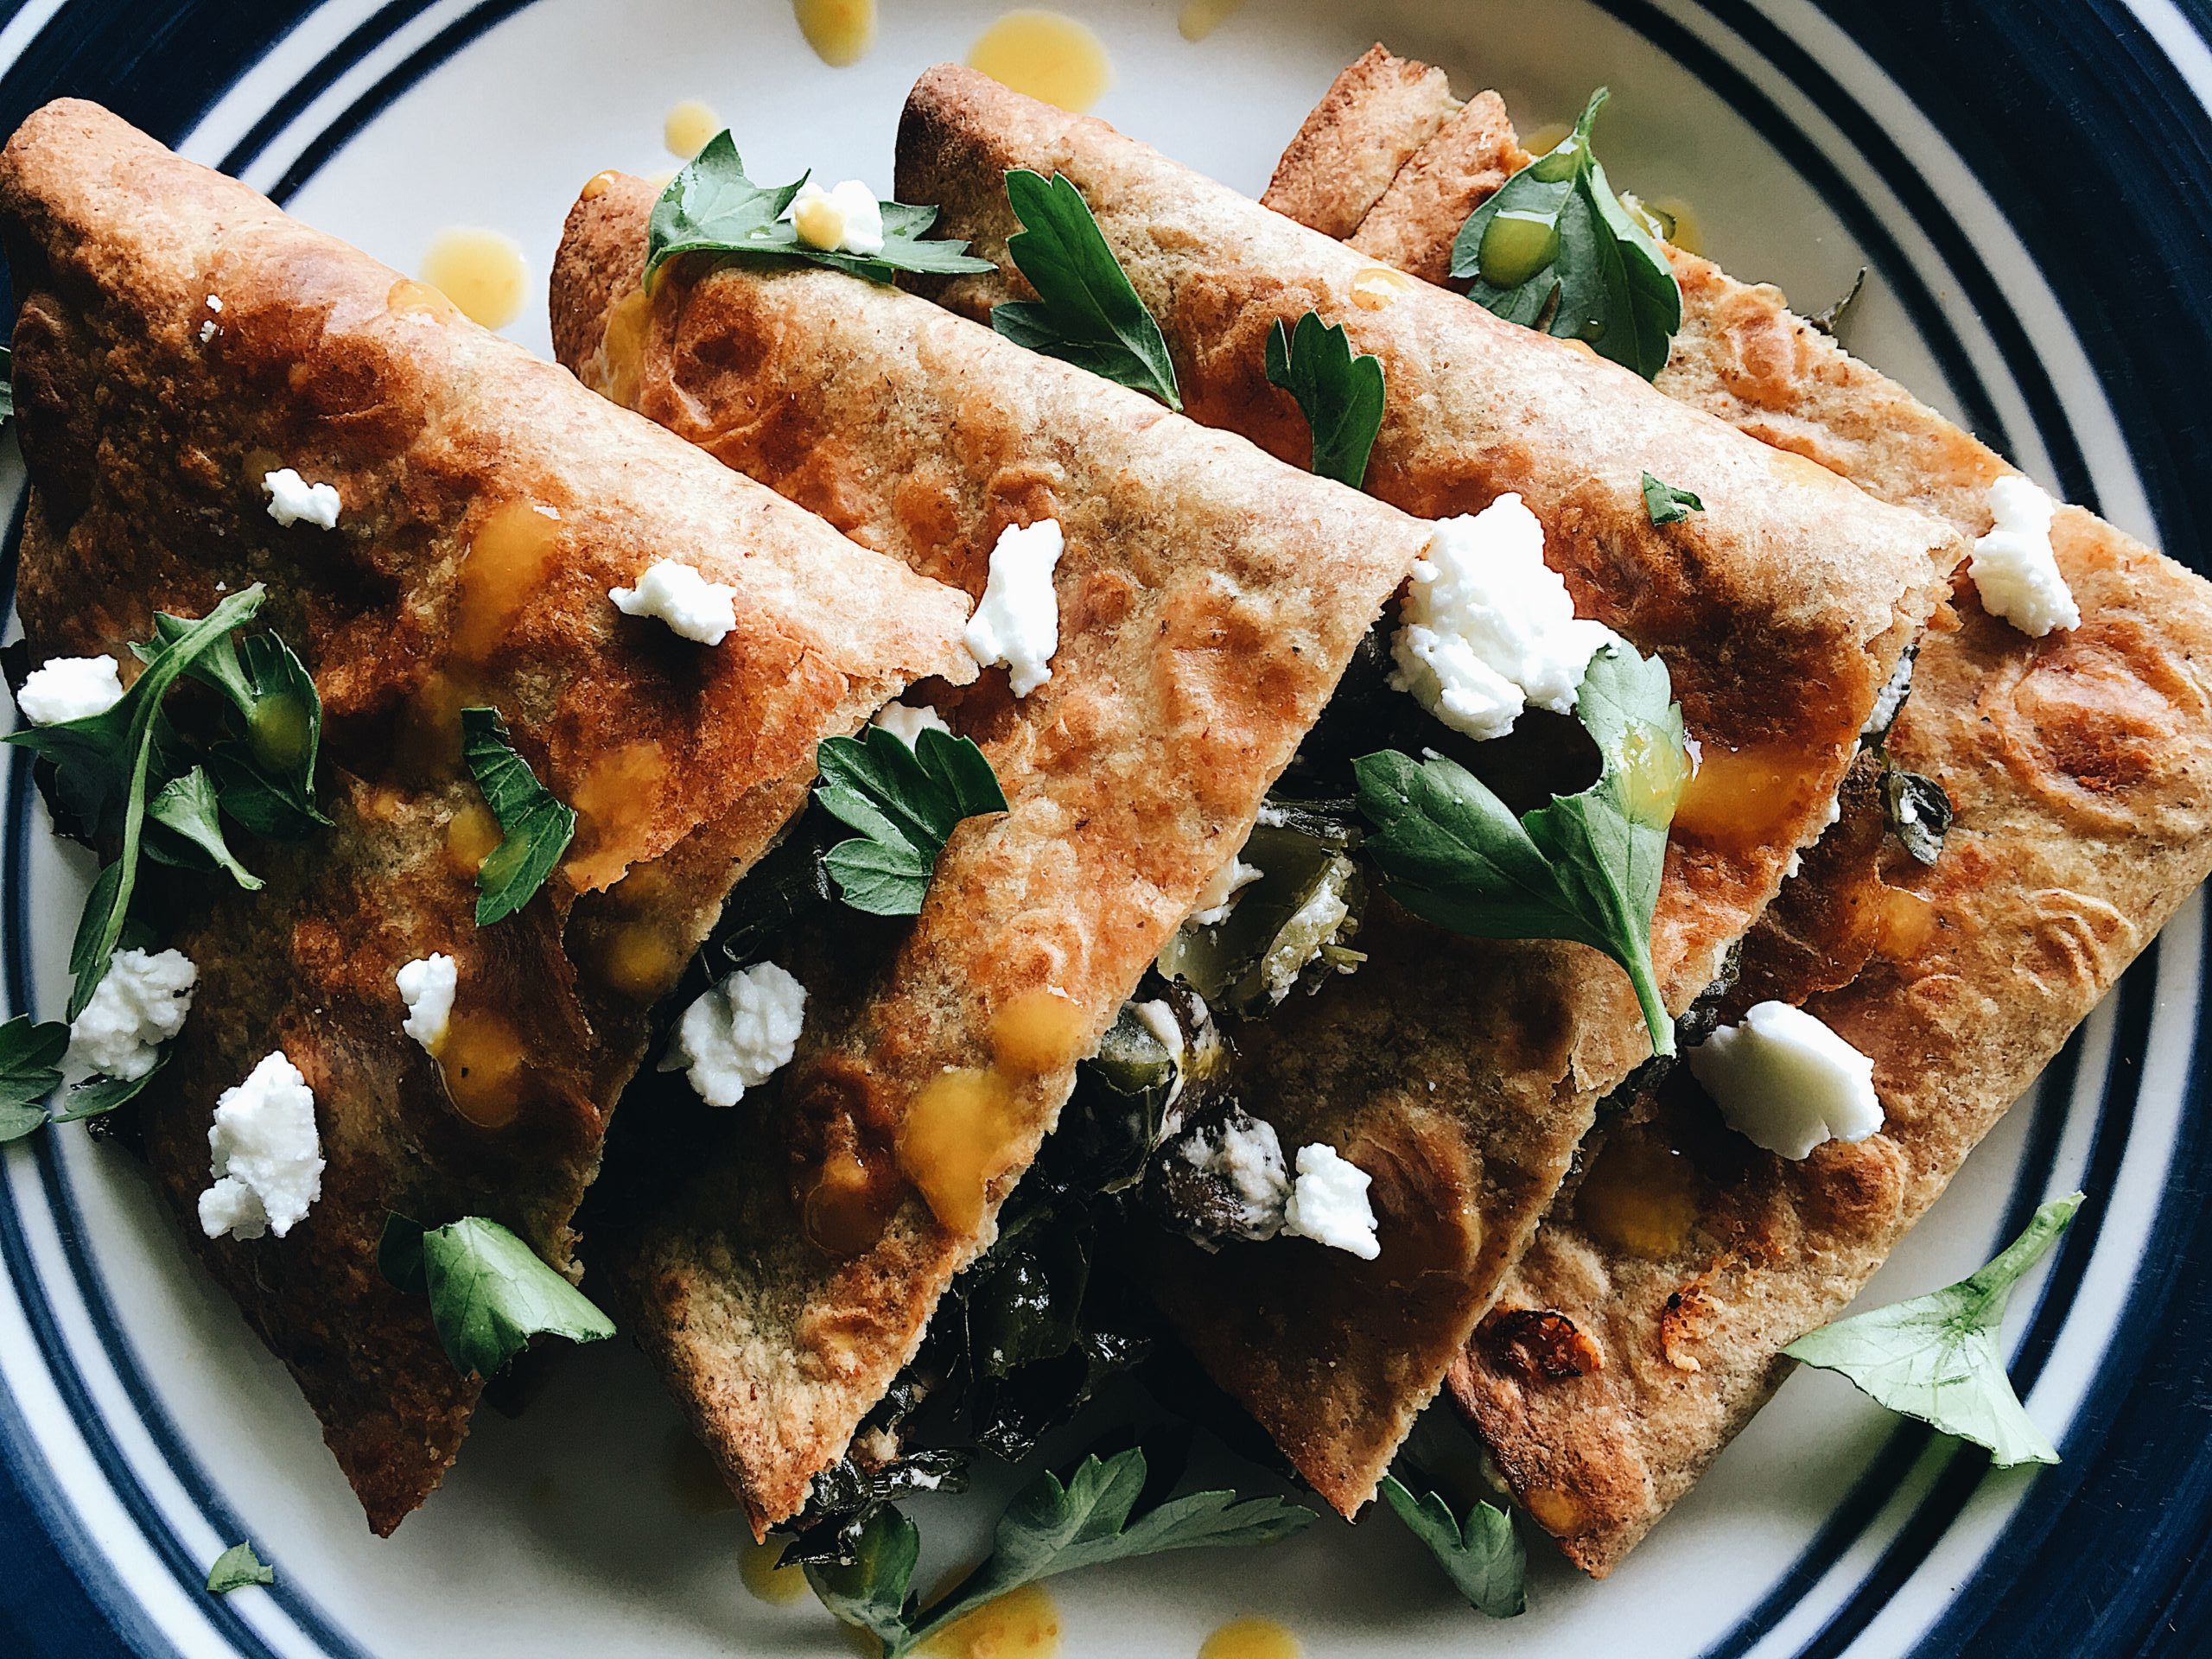 Overhead view of Kale, Mushroom and Goat Cheese Quesadillas. Recipe by Alysha Melnyk with Taproot Farm, PA.